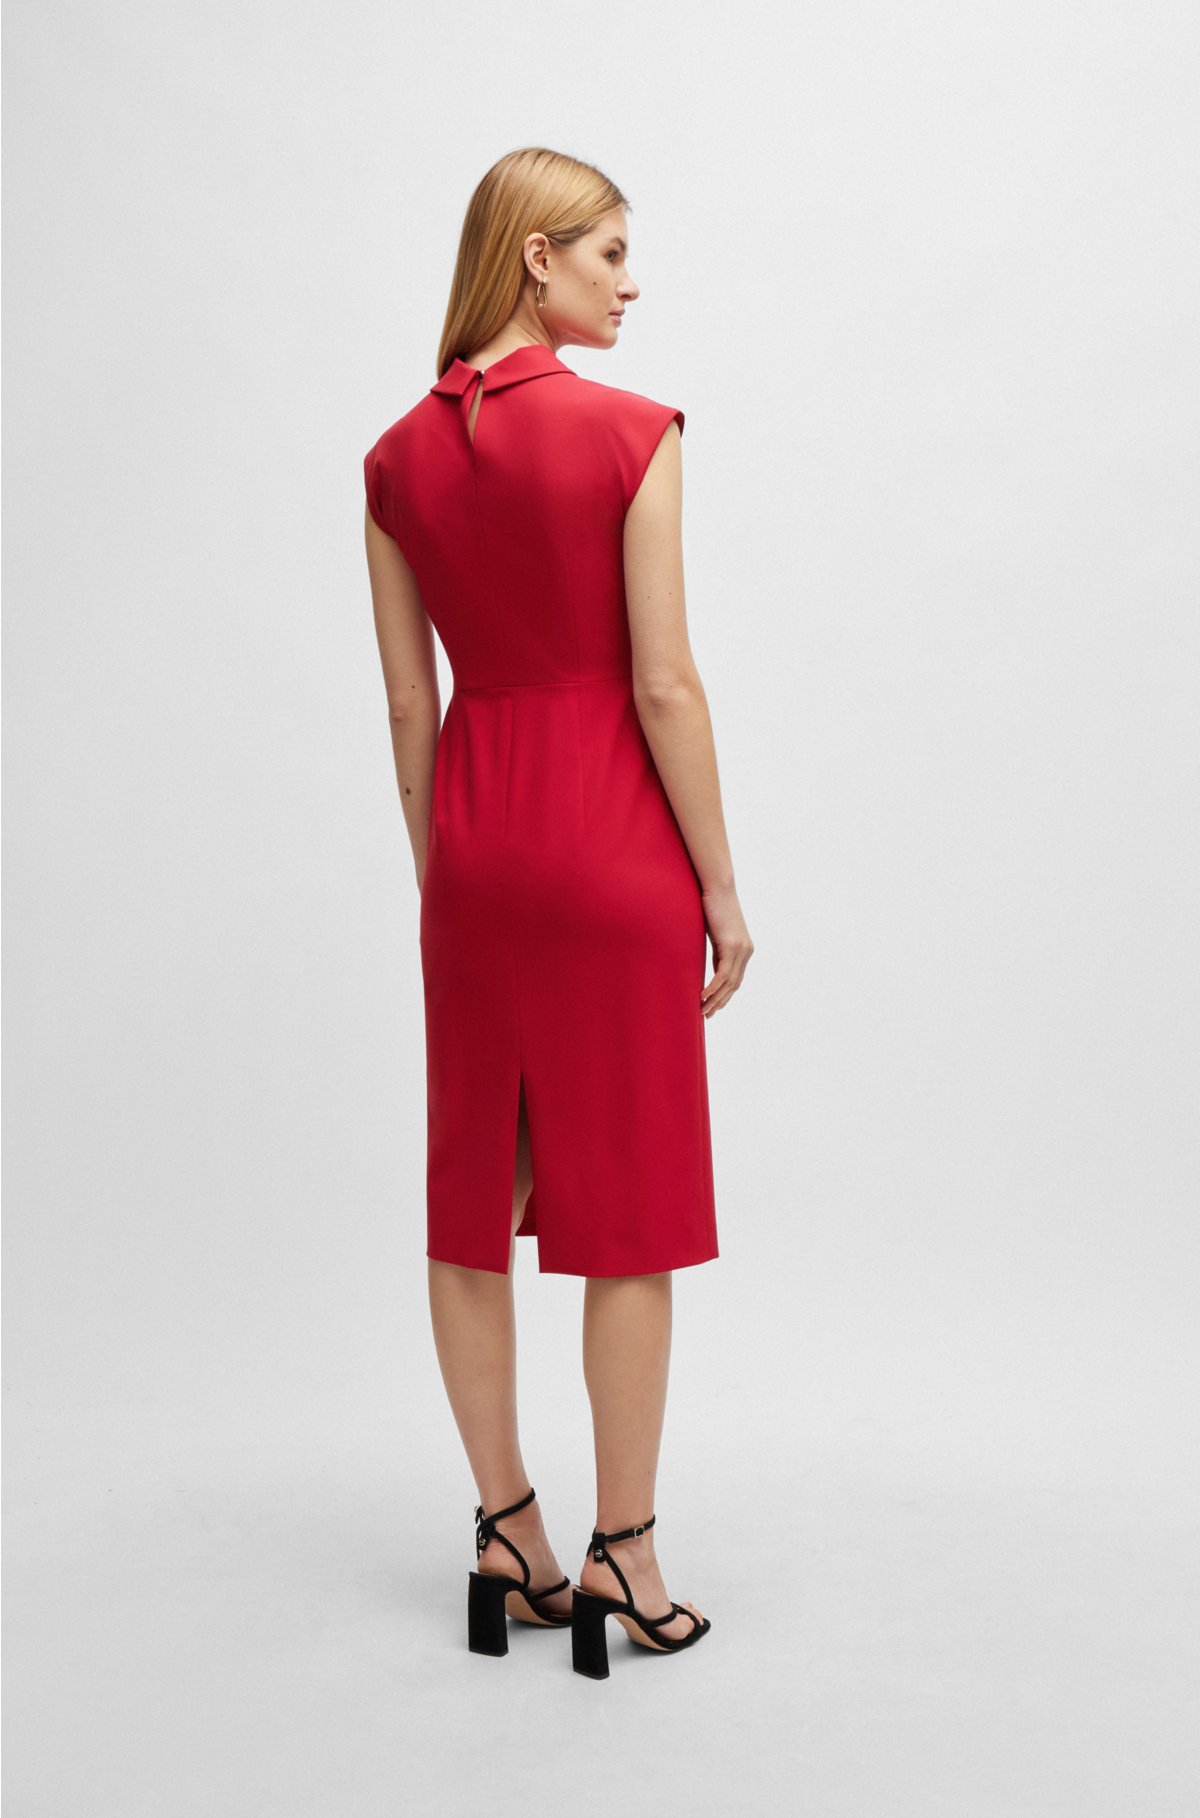 Sleeveless dress in stretch fabric with collar detail, Red